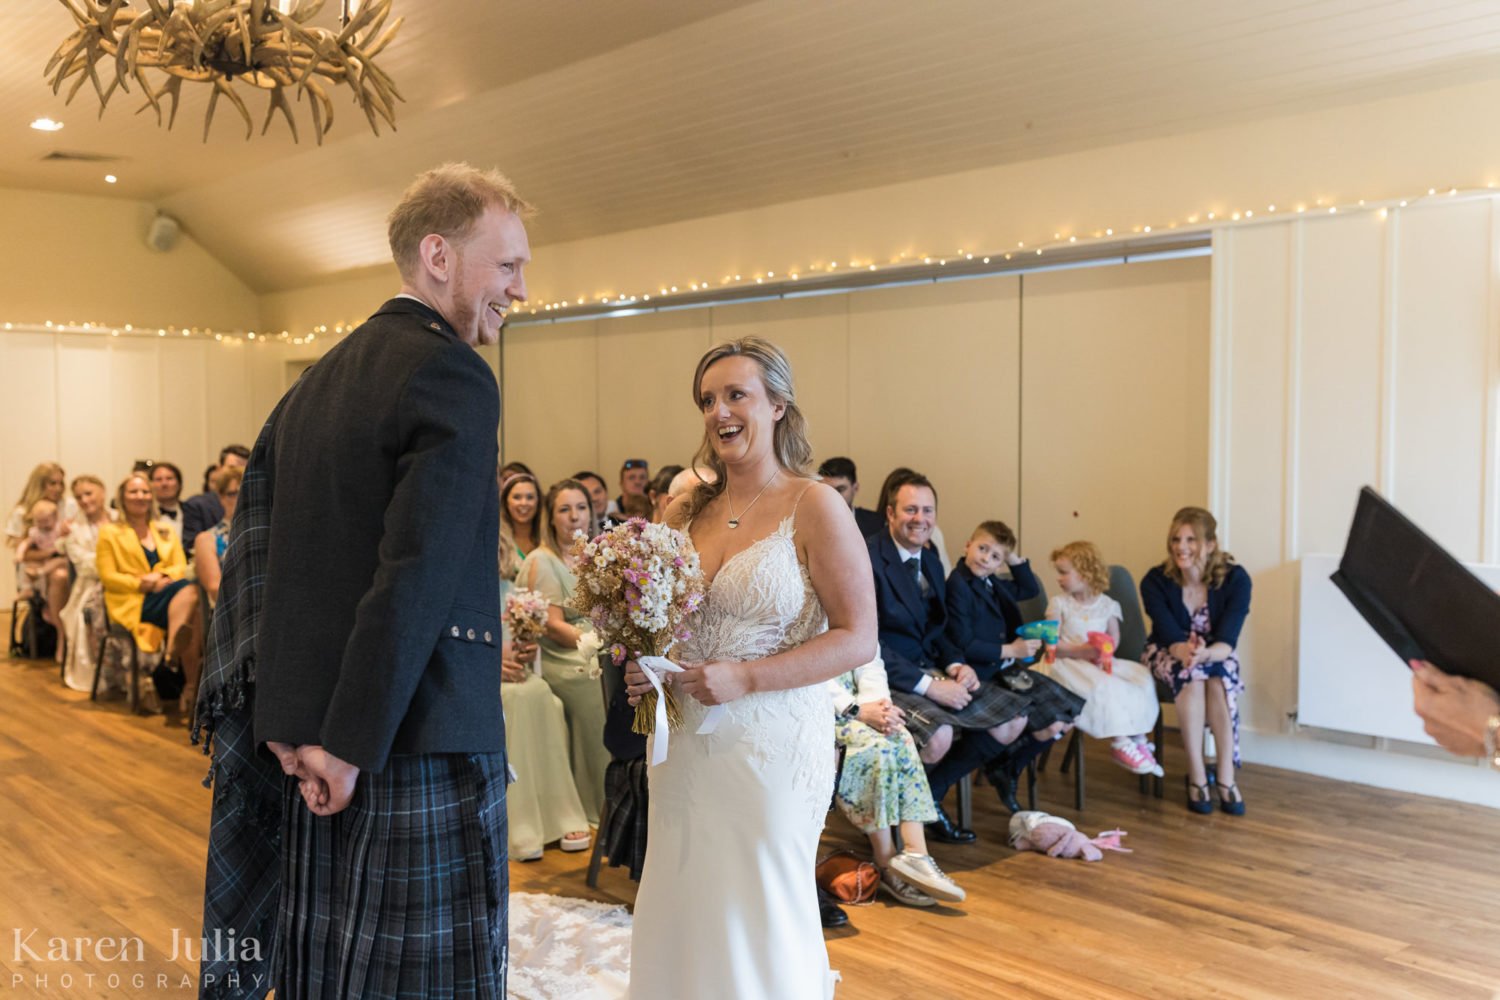 bride and groom exchanging vows during their wedding ceremony at Loch Lomond Arms hotel in Luss